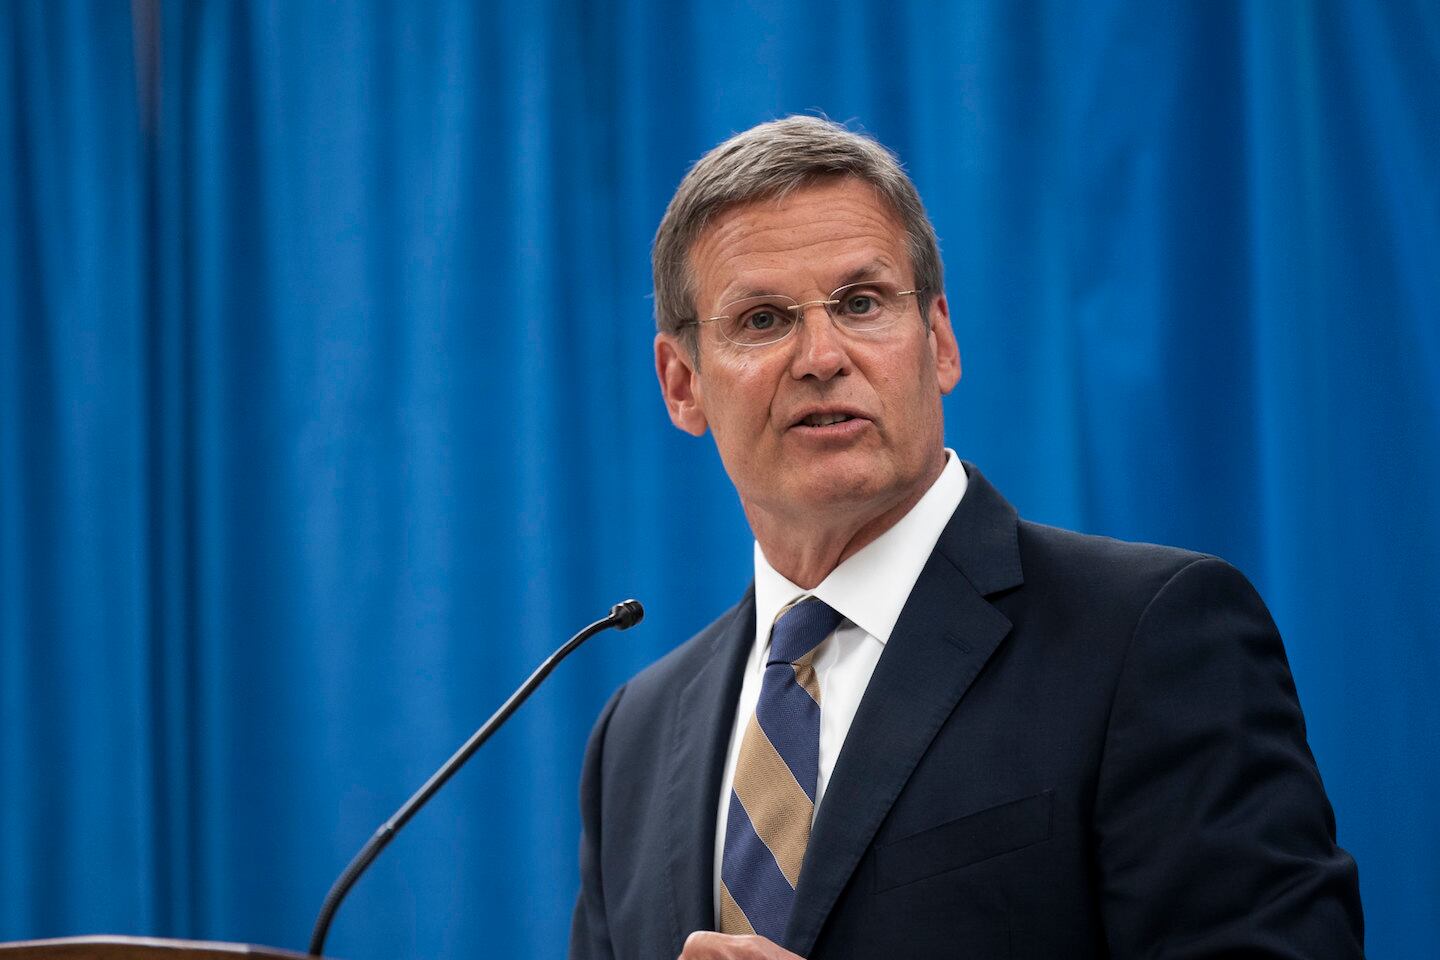 Gov. Bill Lee has been at the helm of Tennessee during the coronavirus pandemic.